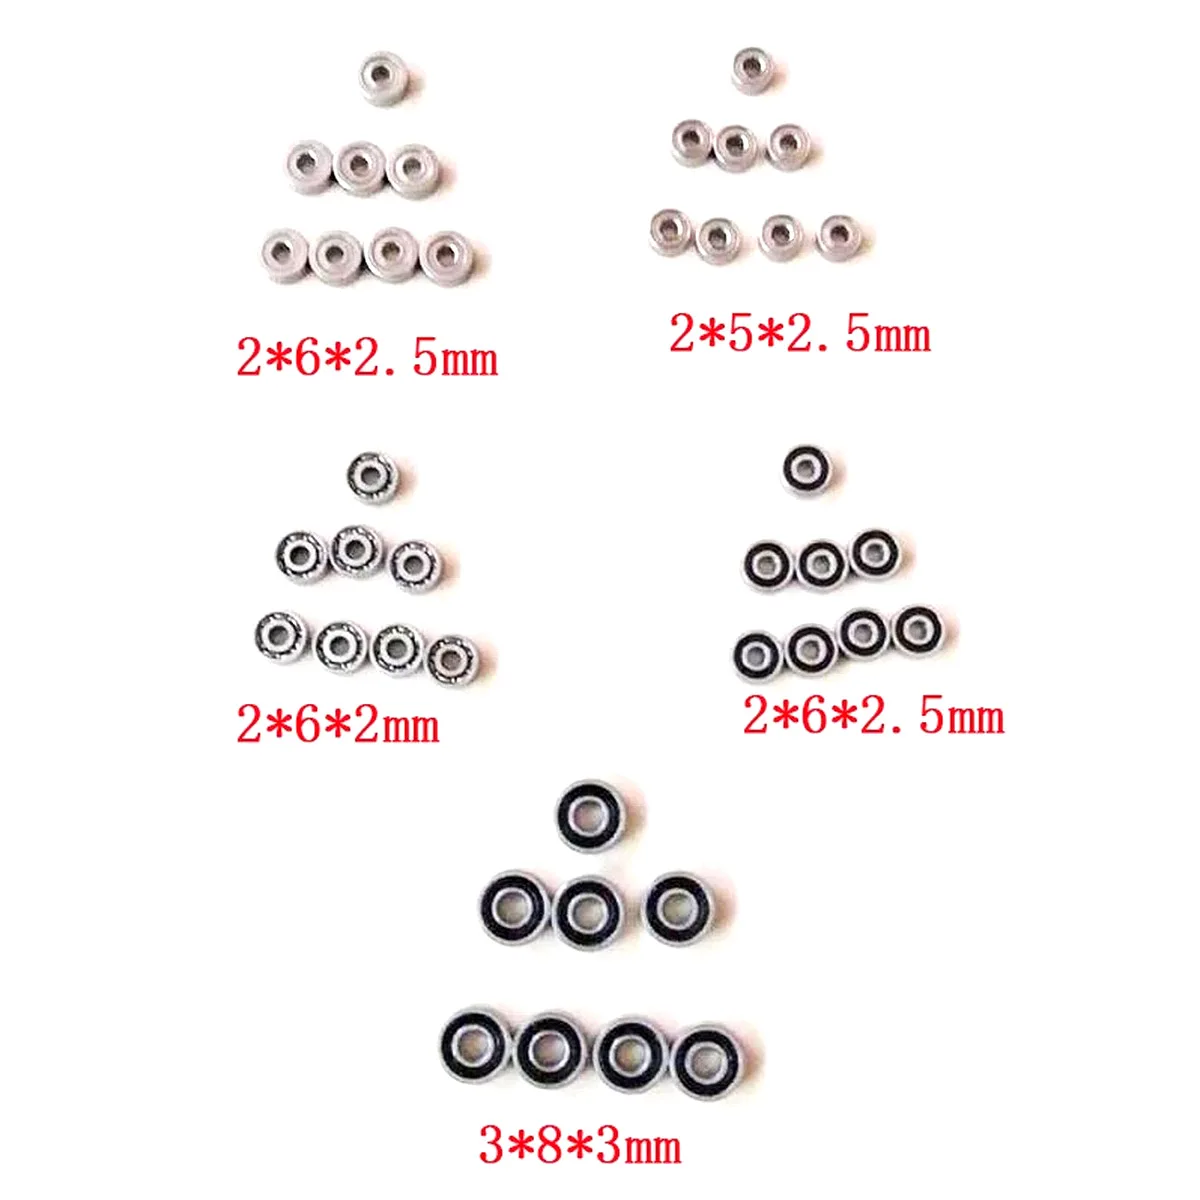 

10 Pcs 520/620 Bearing 5mm/6mm Guide Roller Bearings for Tamiya Mini 4WD RC Car Spare Parts 2*6*2.5mm 2*5*2.5mm 3*8*3mm 5*9*3